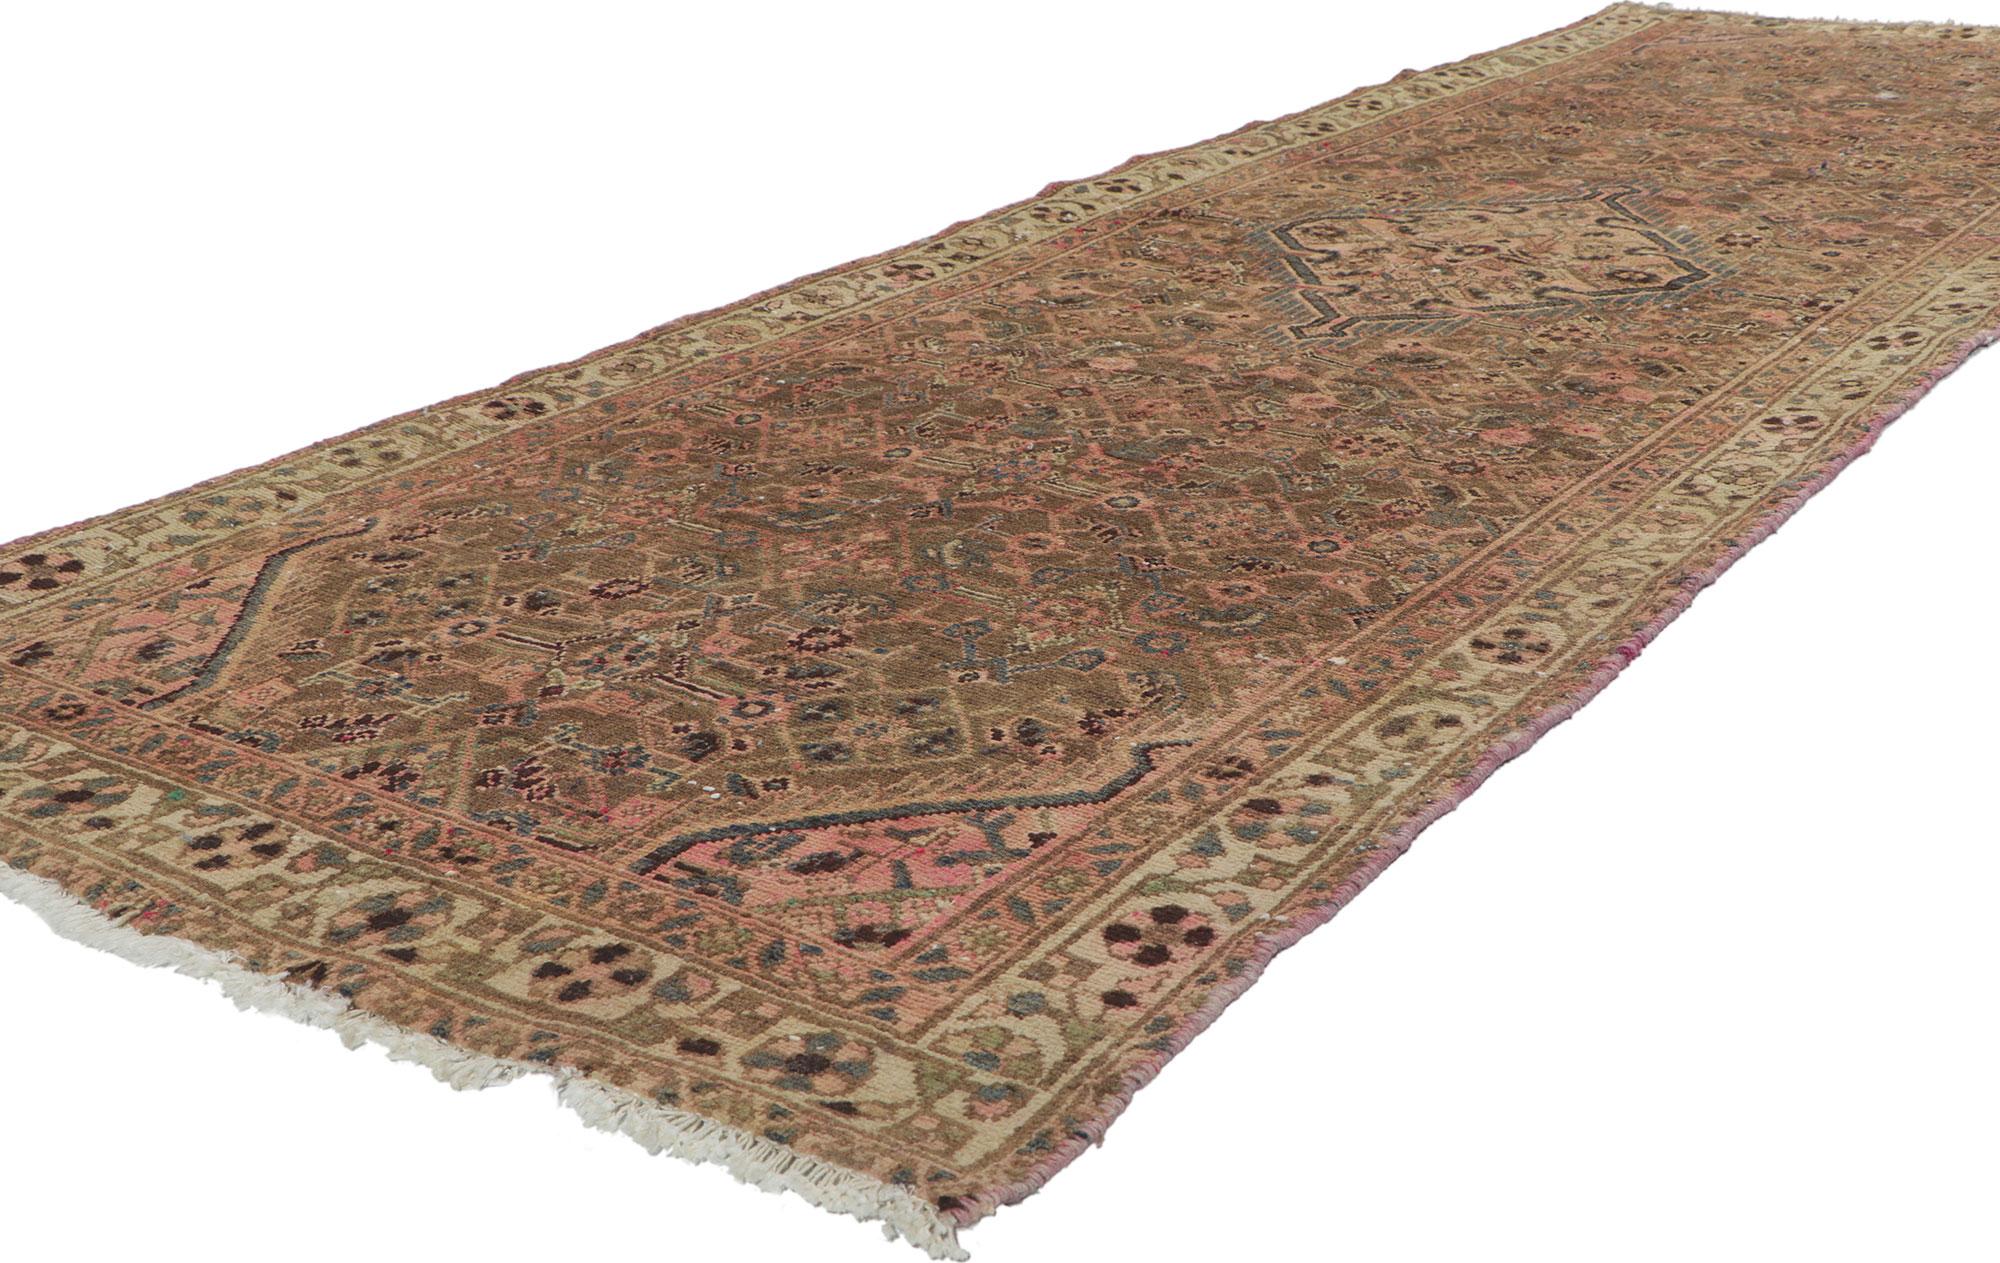 61090 Vintage Persian Hamadan hallway runner with Herati Design 03'04 x 09'10. With its effortless beauty and timeless design, this hand knotted wool vintage Persian Hamadan carpet runner will take on a curated lived-in look that feels timeless